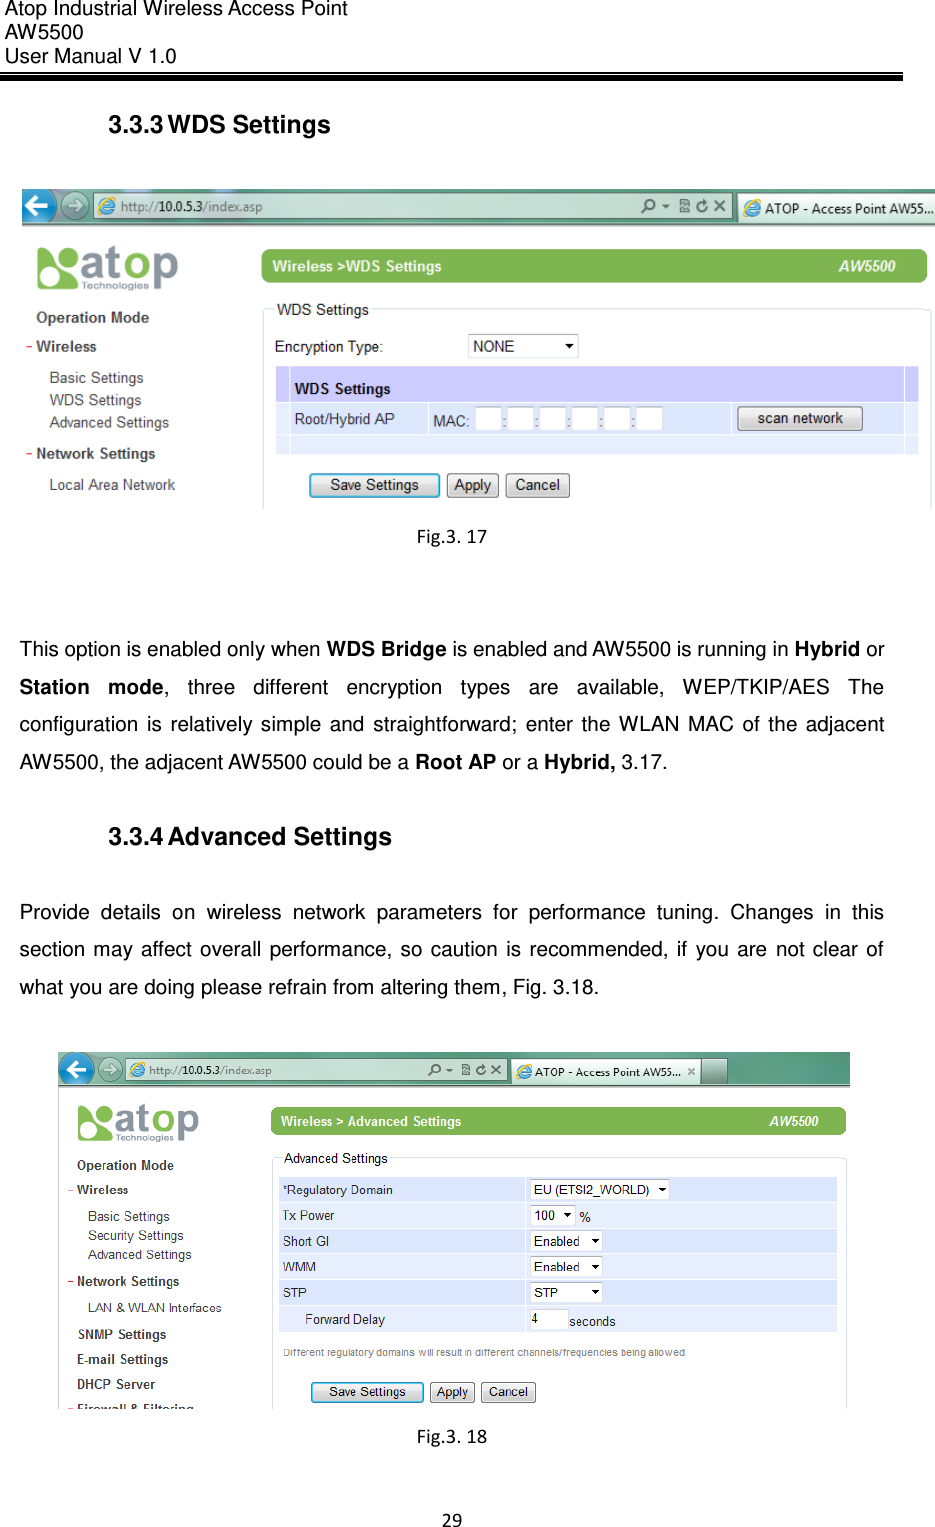 Atop Industrial Wireless Access Point AW 5500 User Manual V 1.0                      29  3.3.3 WDS Settings   Fig.3. 17   This option is enabled only when WDS Bridge is enabled and AW5500 is running in Hybrid or Station  mode,  three  different  encryption  types  are  available,  WEP/TKIP/AES  The configuration  is  relatively  simple  and  straightforward;  enter  the  WLAN  MAC  of  the  adjacent AW5500, the adjacent AW5500 could be a Root AP or a Hybrid, 3.17.  3.3.4 Advanced Settings  Provide  details  on  wireless  network  parameters  for  performance  tuning.  Changes  in  this section may affect  overall  performance, so  caution  is  recommended,  if  you are  not  clear  of what you are doing please refrain from altering them, Fig. 3.18.   Fig.3. 18  